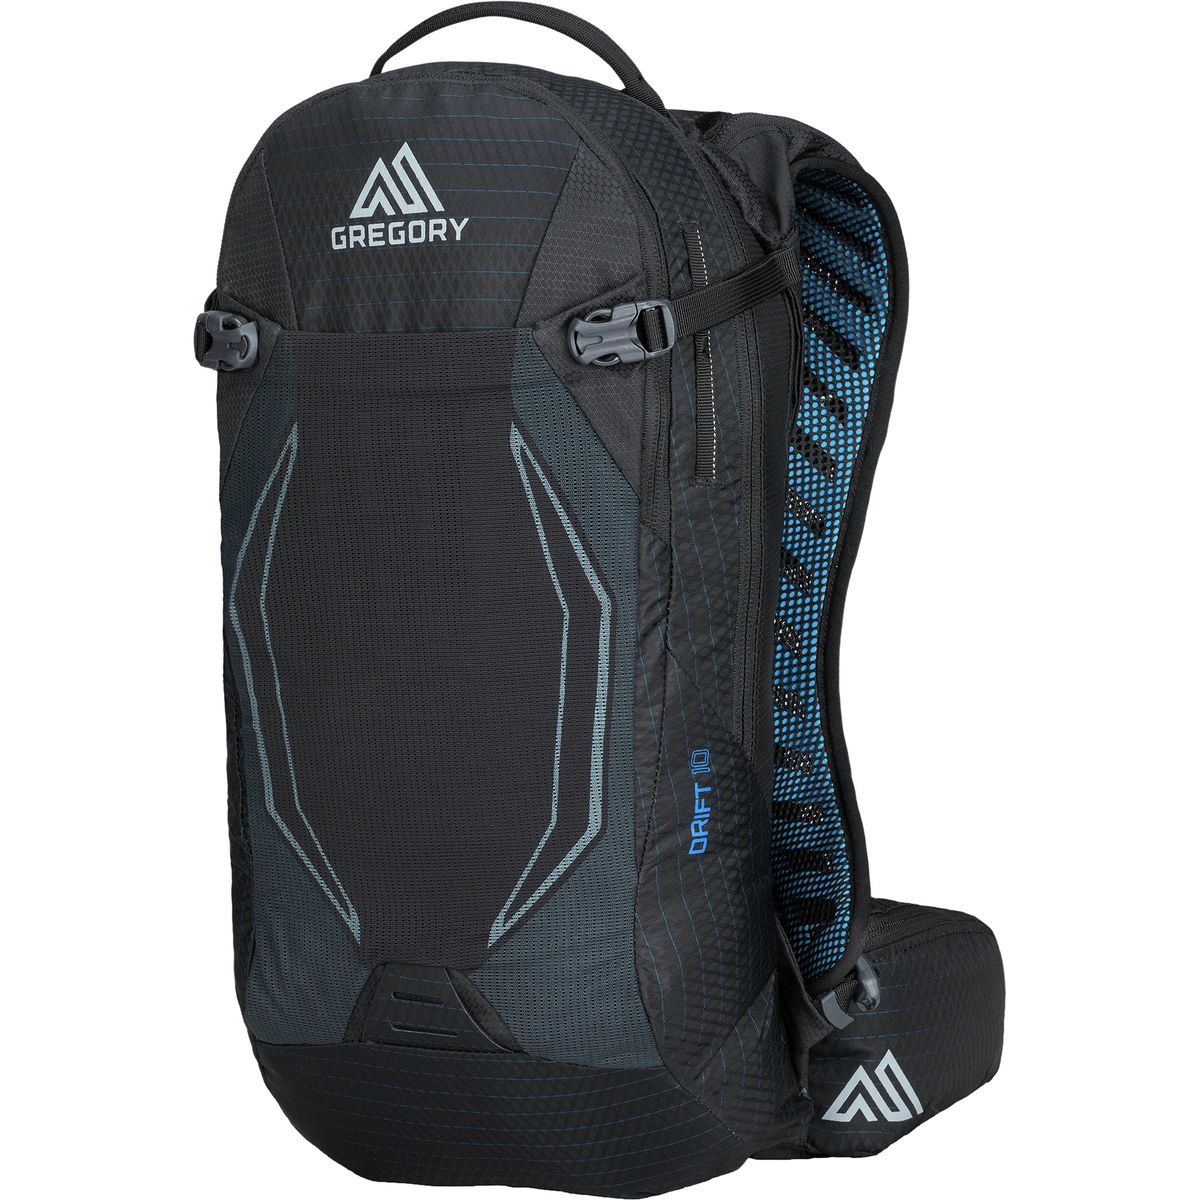 Gregory Drift 10 Hydration Pack 610cu in